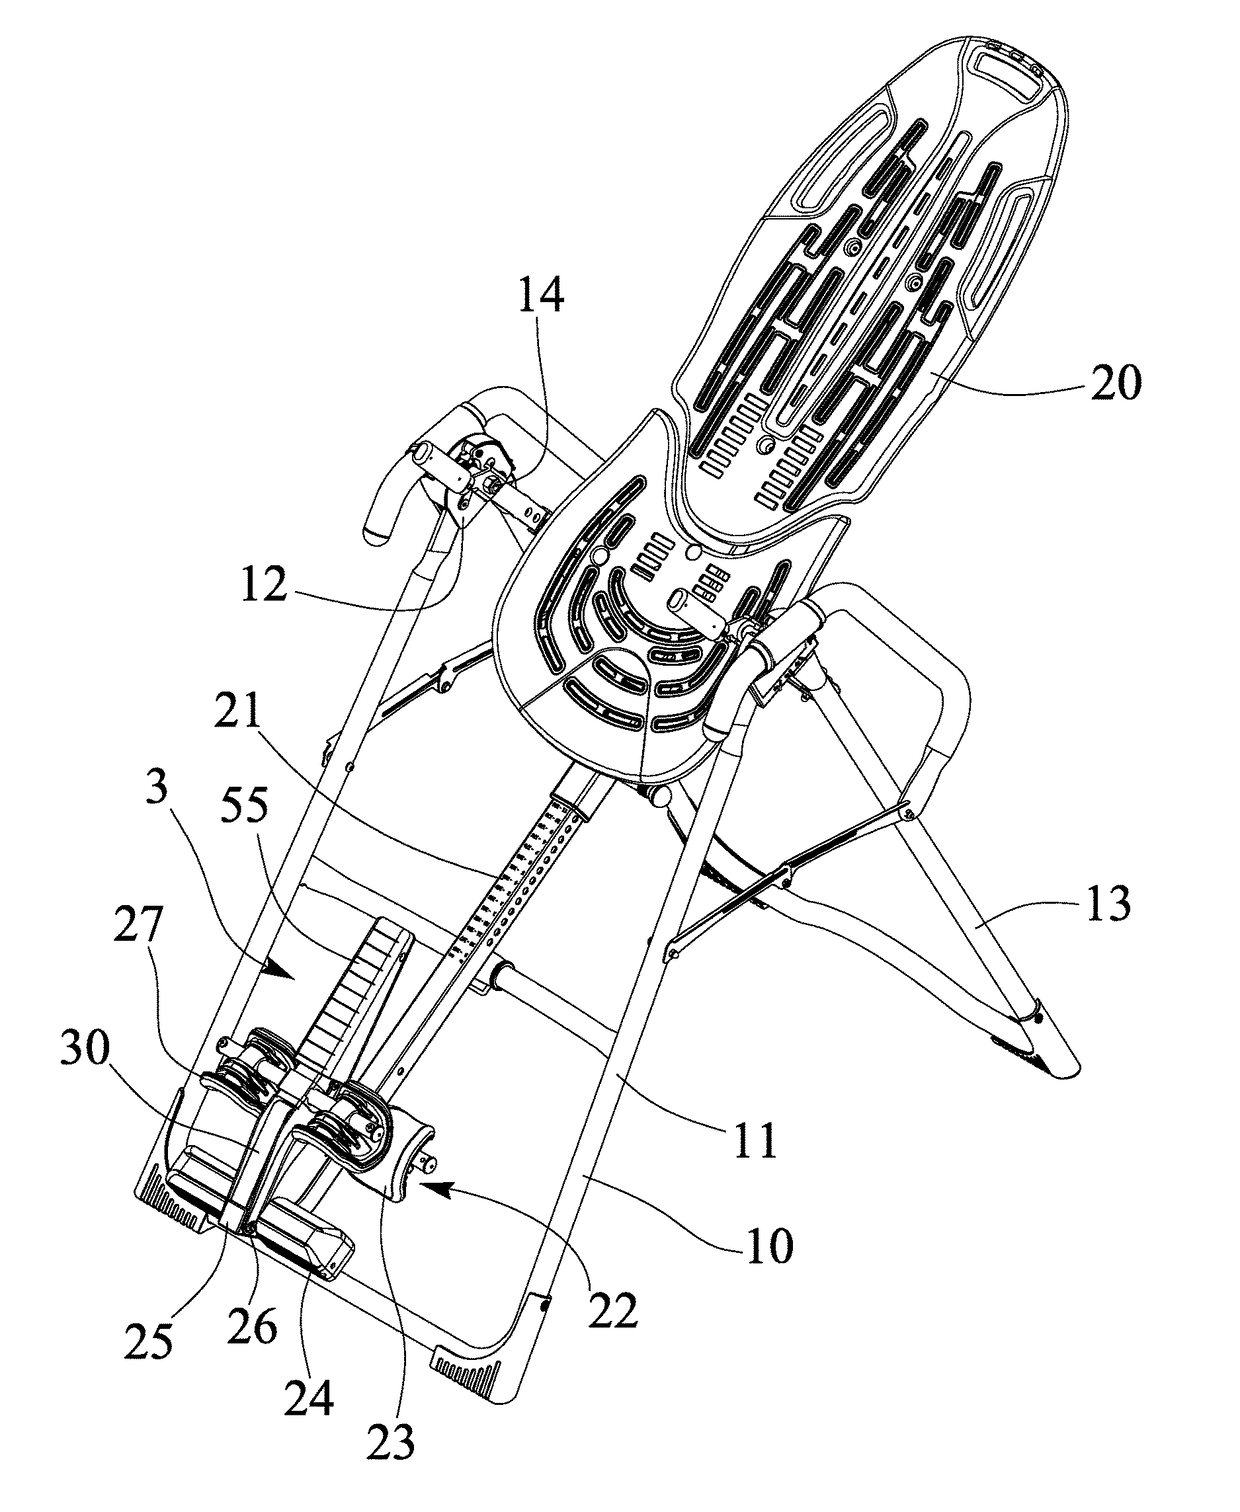 Tilting inversion exerciser having safety foot retaining device